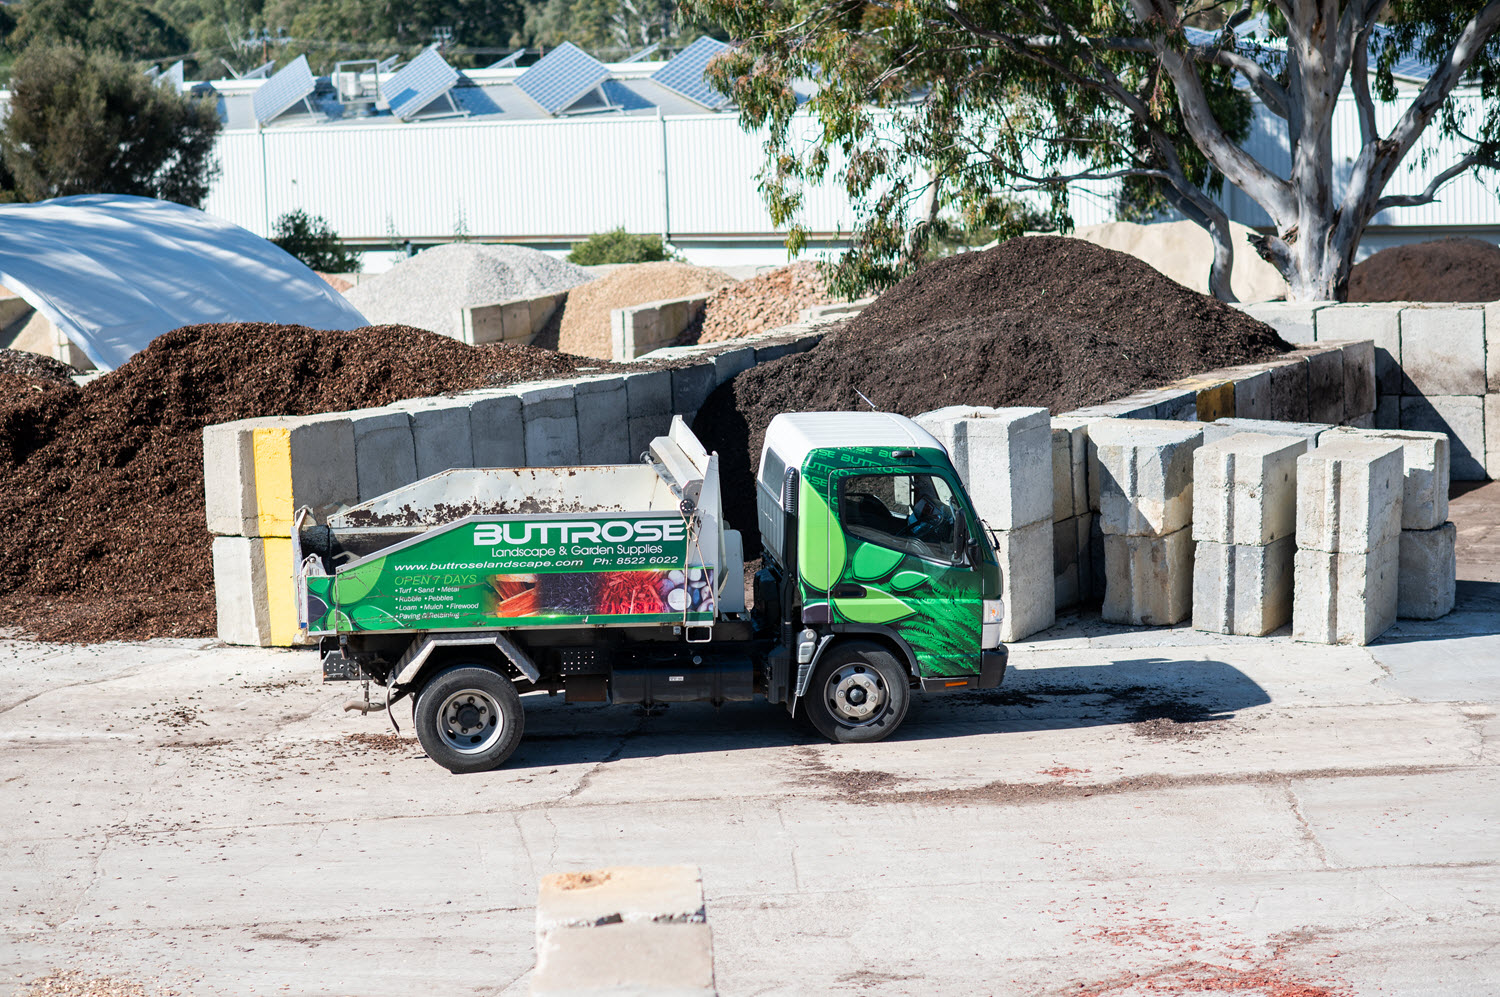 Buttrose Landscape Yard truck with soil in background